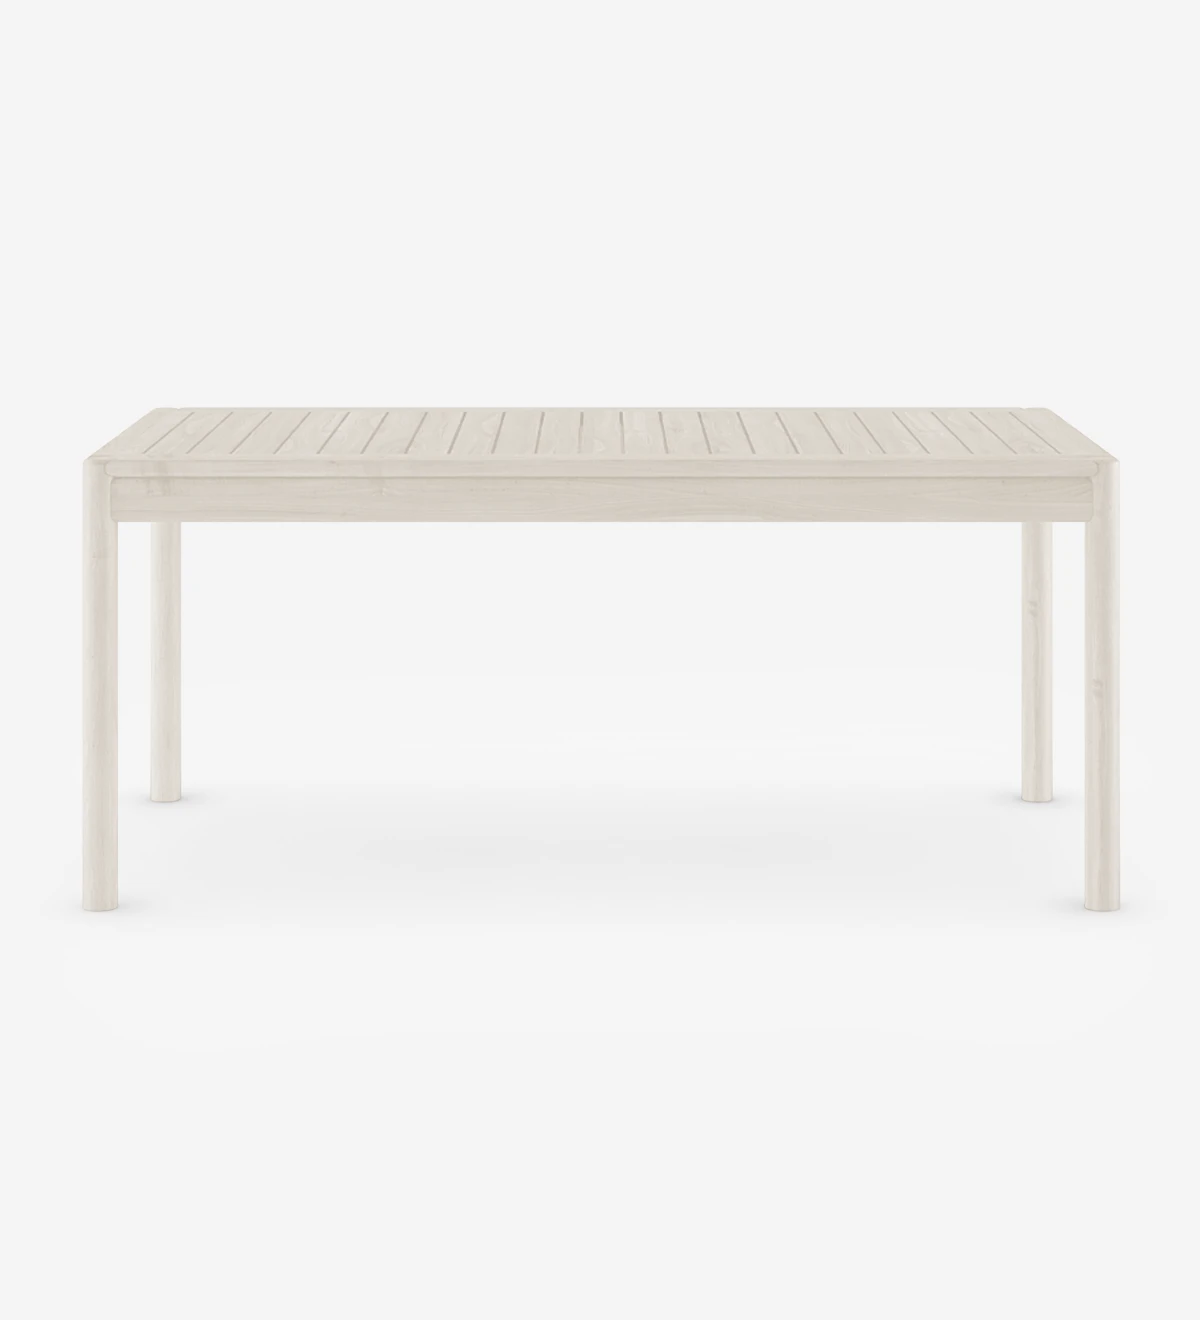 Pearl lacquered rectangular dining table.